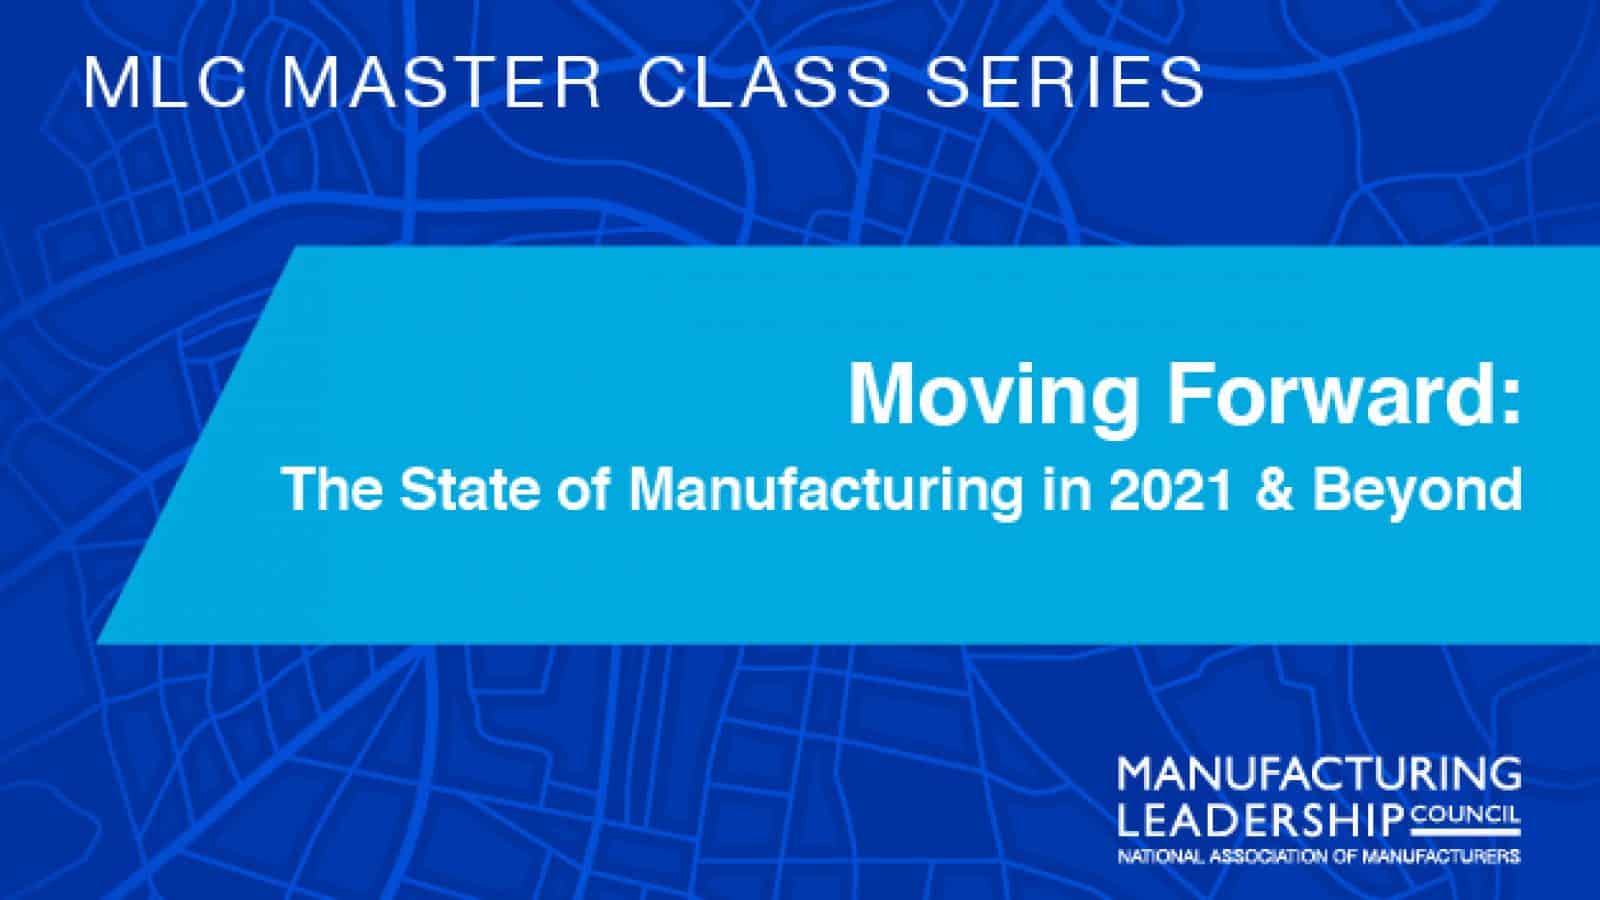 Moving Forward: The State of Manufacturing in 2021 & Beyond